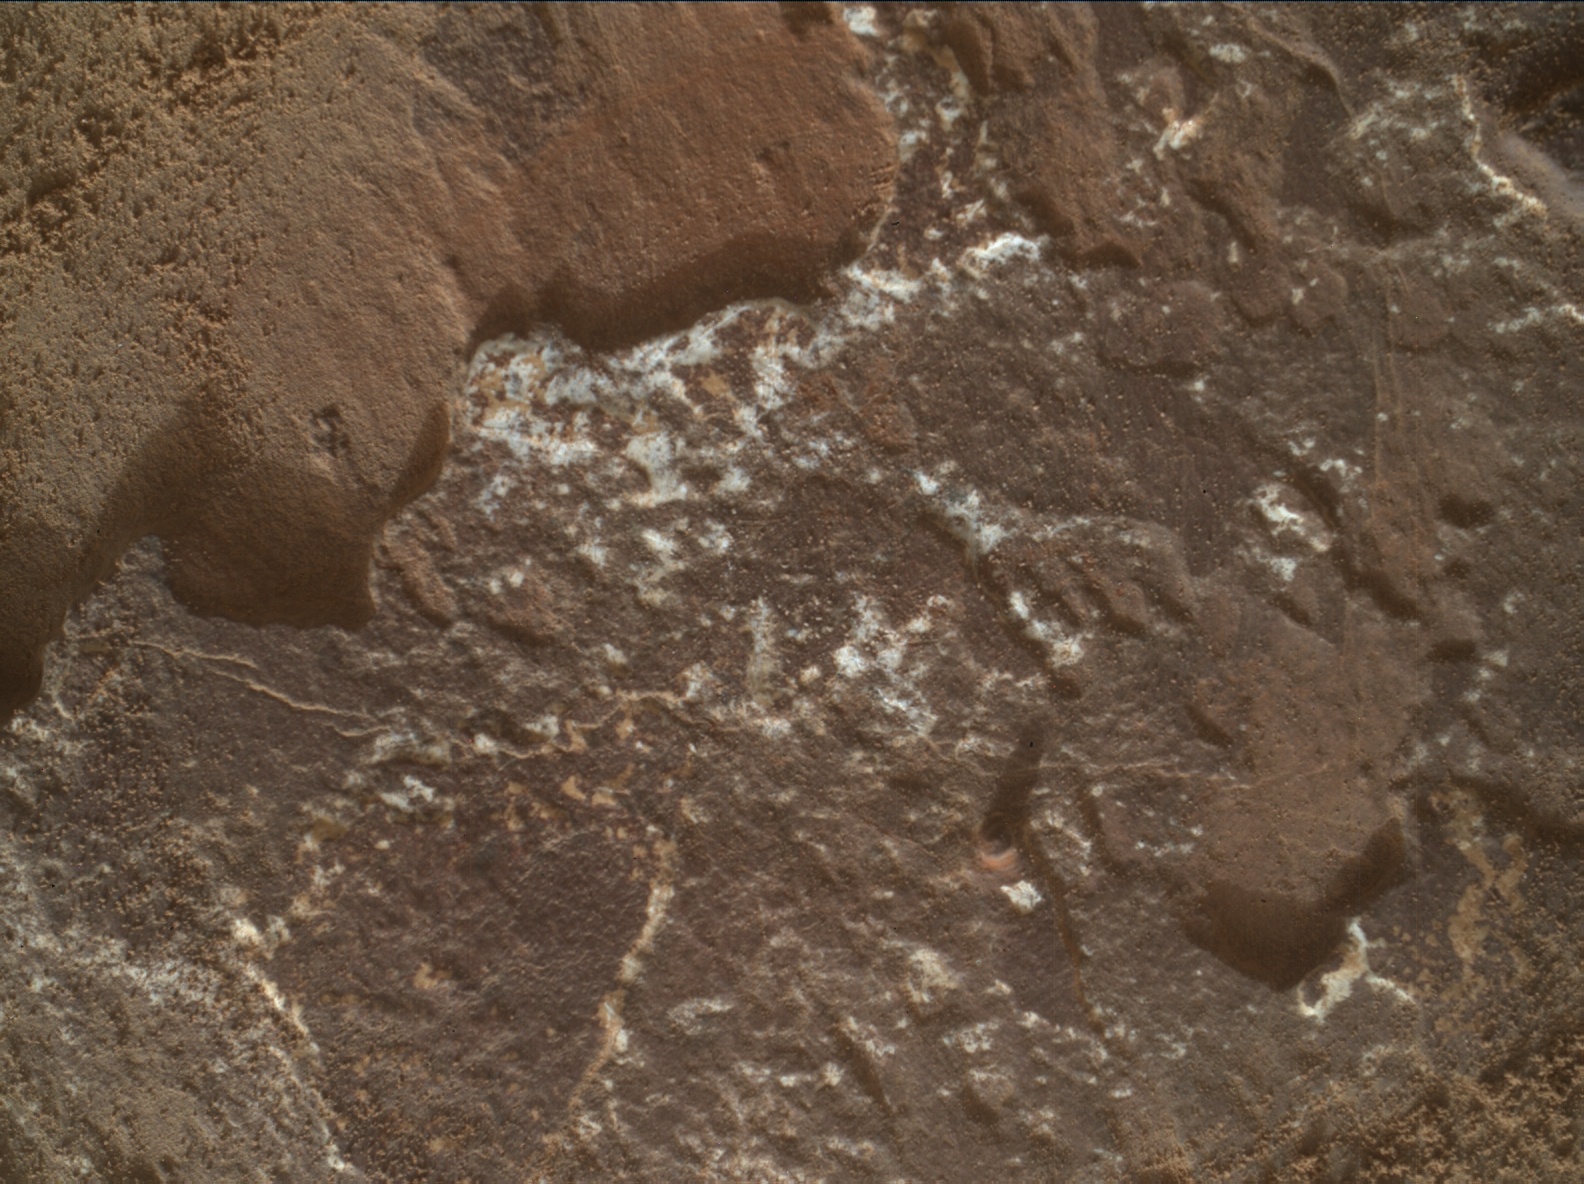 Nasa's Mars rover Curiosity acquired this image using its Mars Hand Lens Imager (MAHLI) on Sol 2048